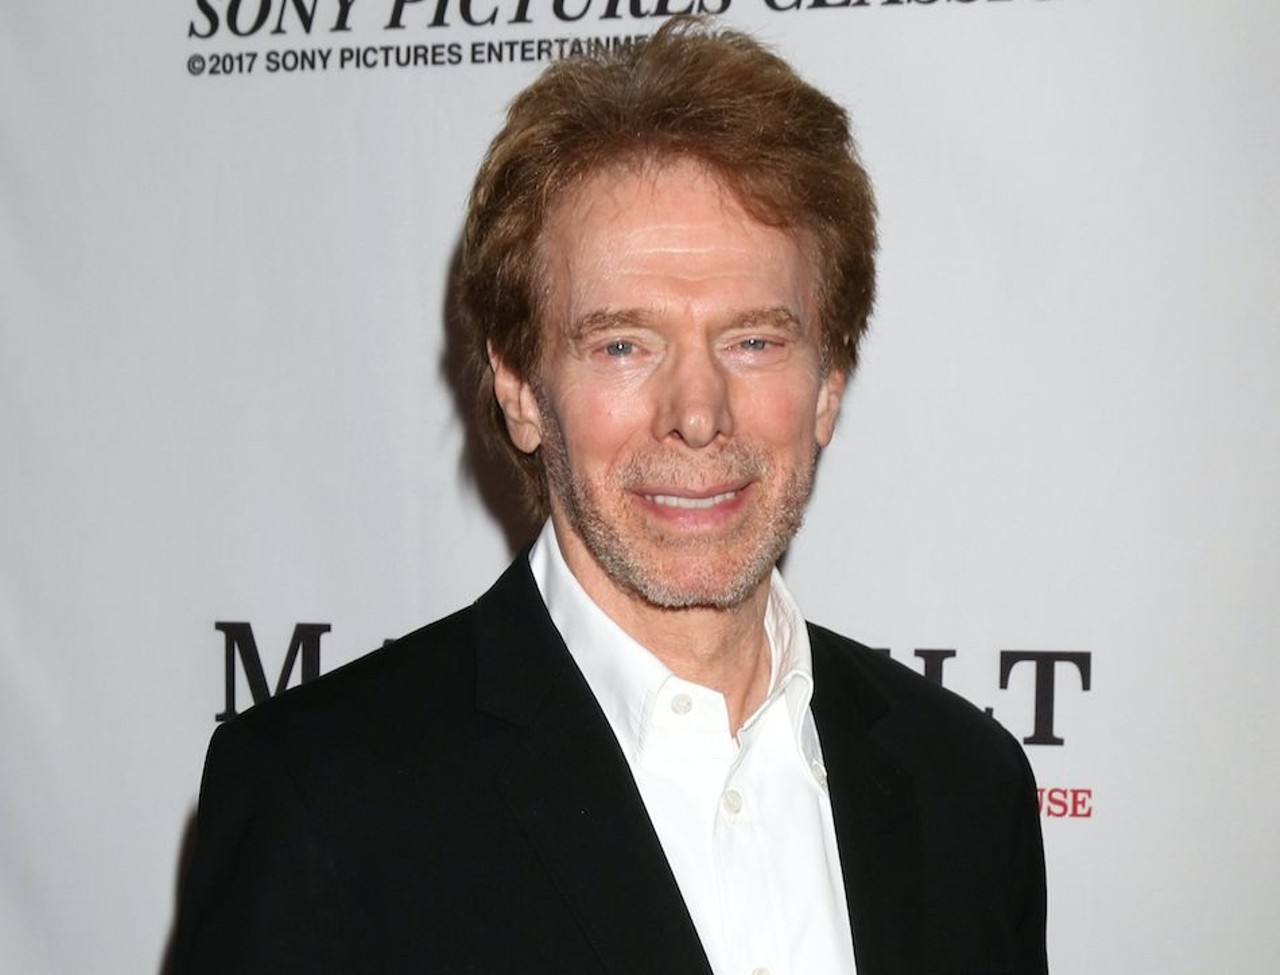 Mumford: Jerry Bruckheimer
Film and television producer Jerry Bruckheimer — who is credited for massive films like Bad Boys, Top Gun, Pirates of the Caribbean, Black Hawk Down, and more — grew up in Detroit. He graduated from Mumford High School in 1961. 